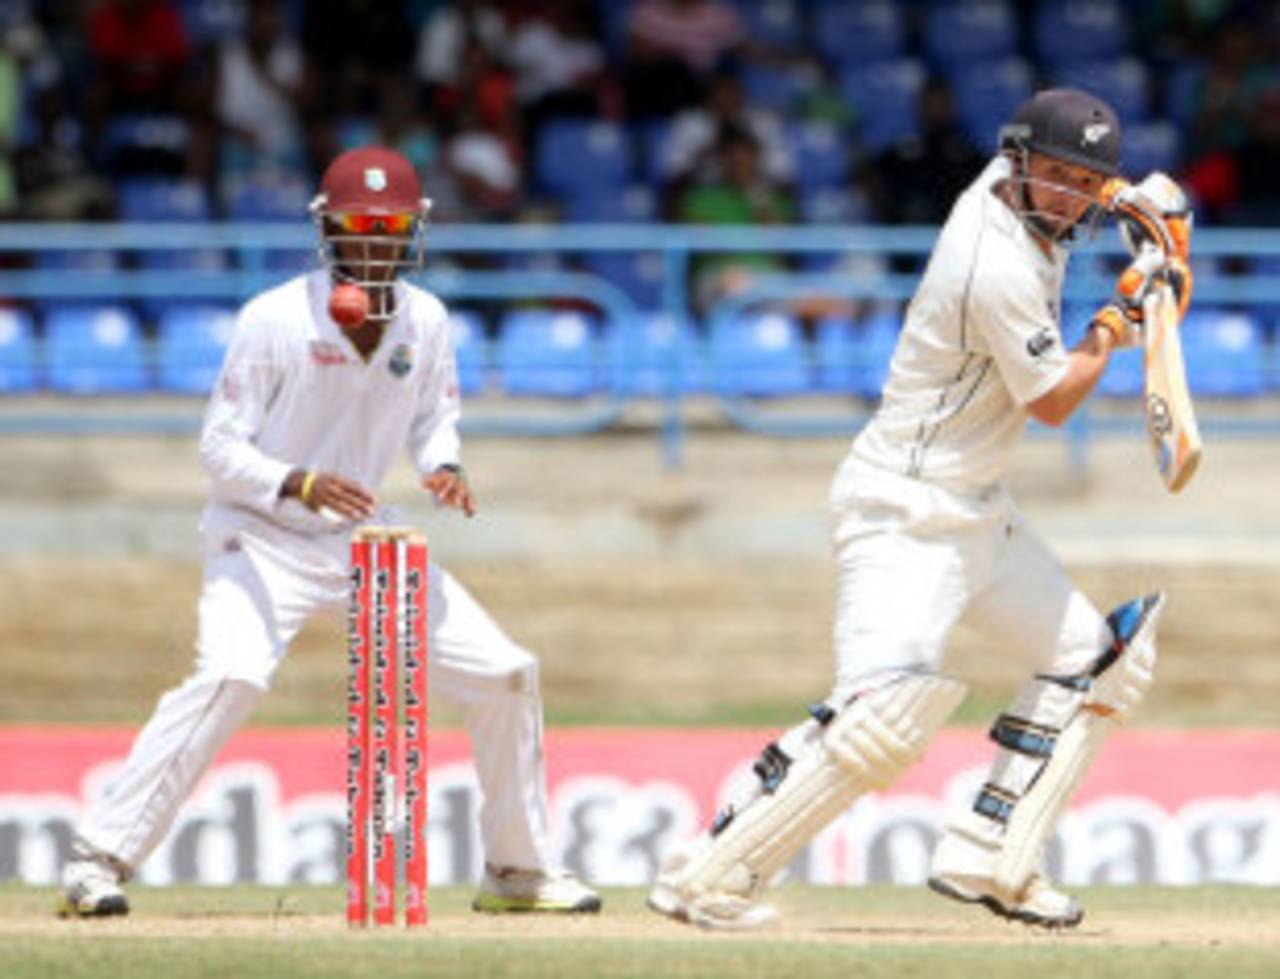 BJ Watling played one of the slowest innings by a New Zealand wicketkeeper, but couldn't stave off a West Indies win&nbsp;&nbsp;&bull;&nbsp;&nbsp;WICB